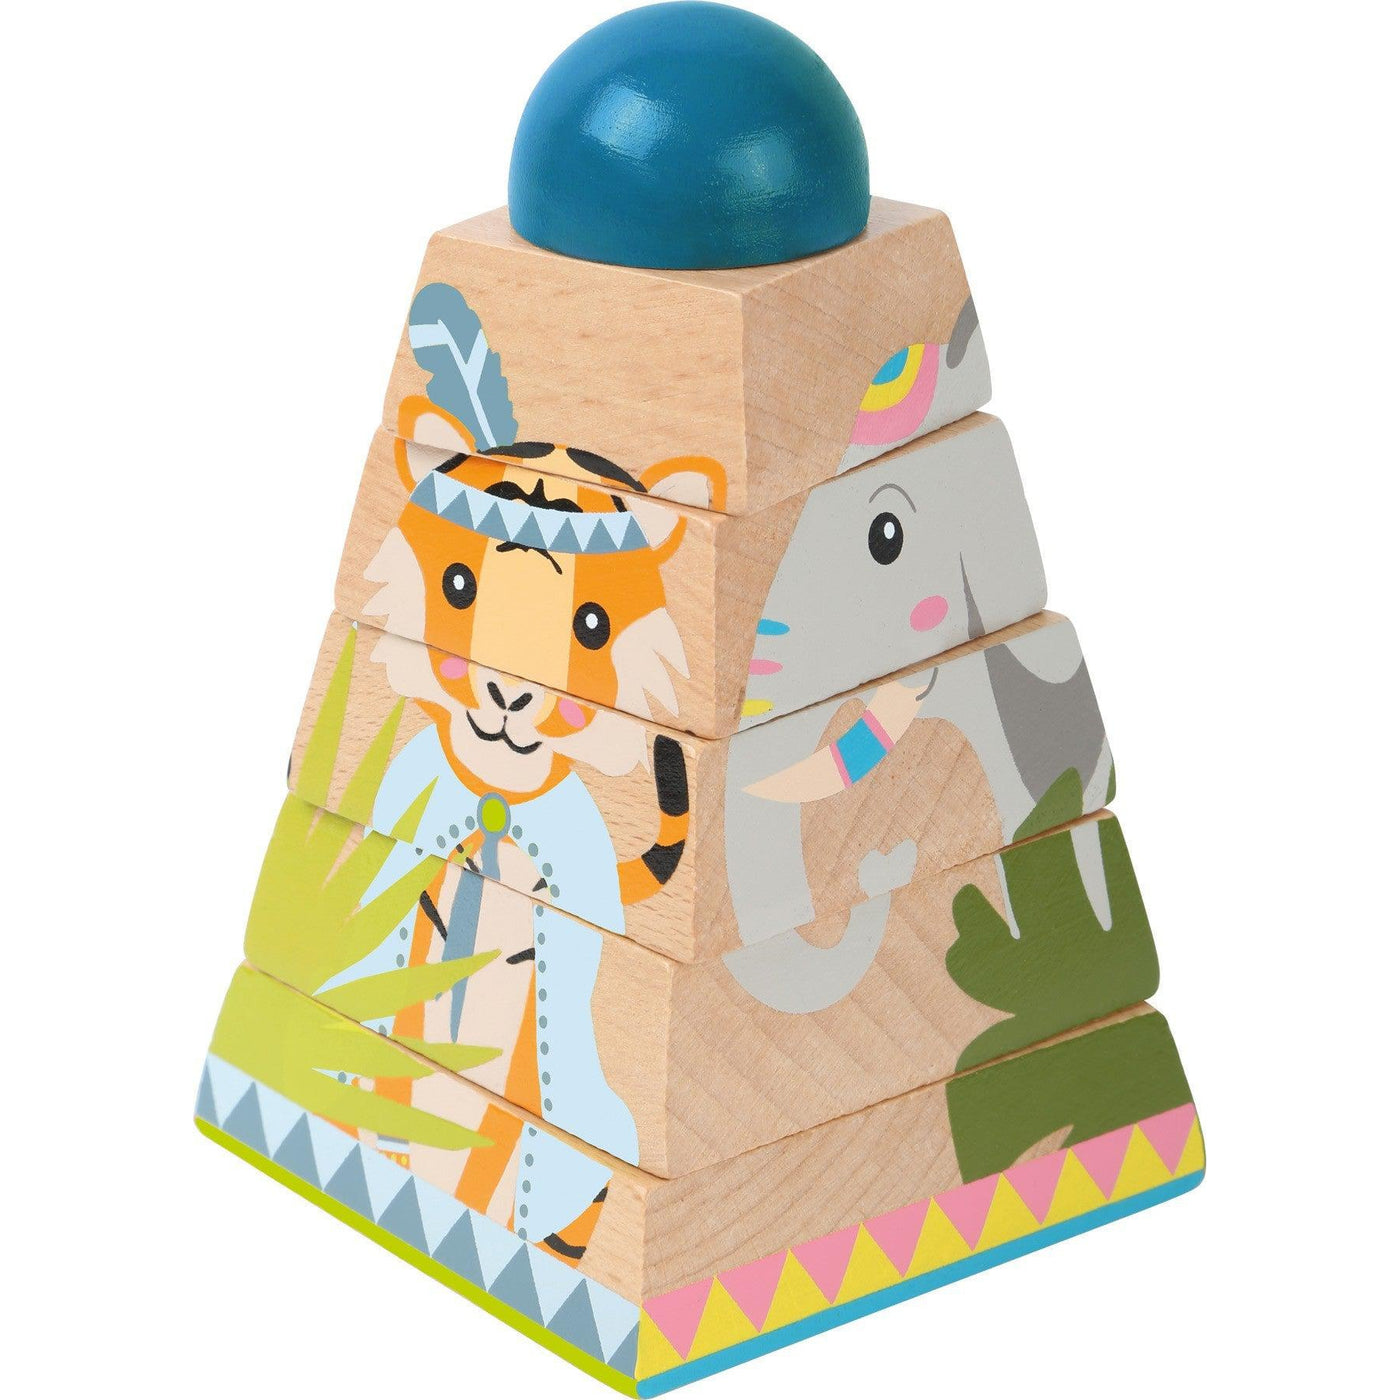 Cube Puzzle Tower "Jungle"